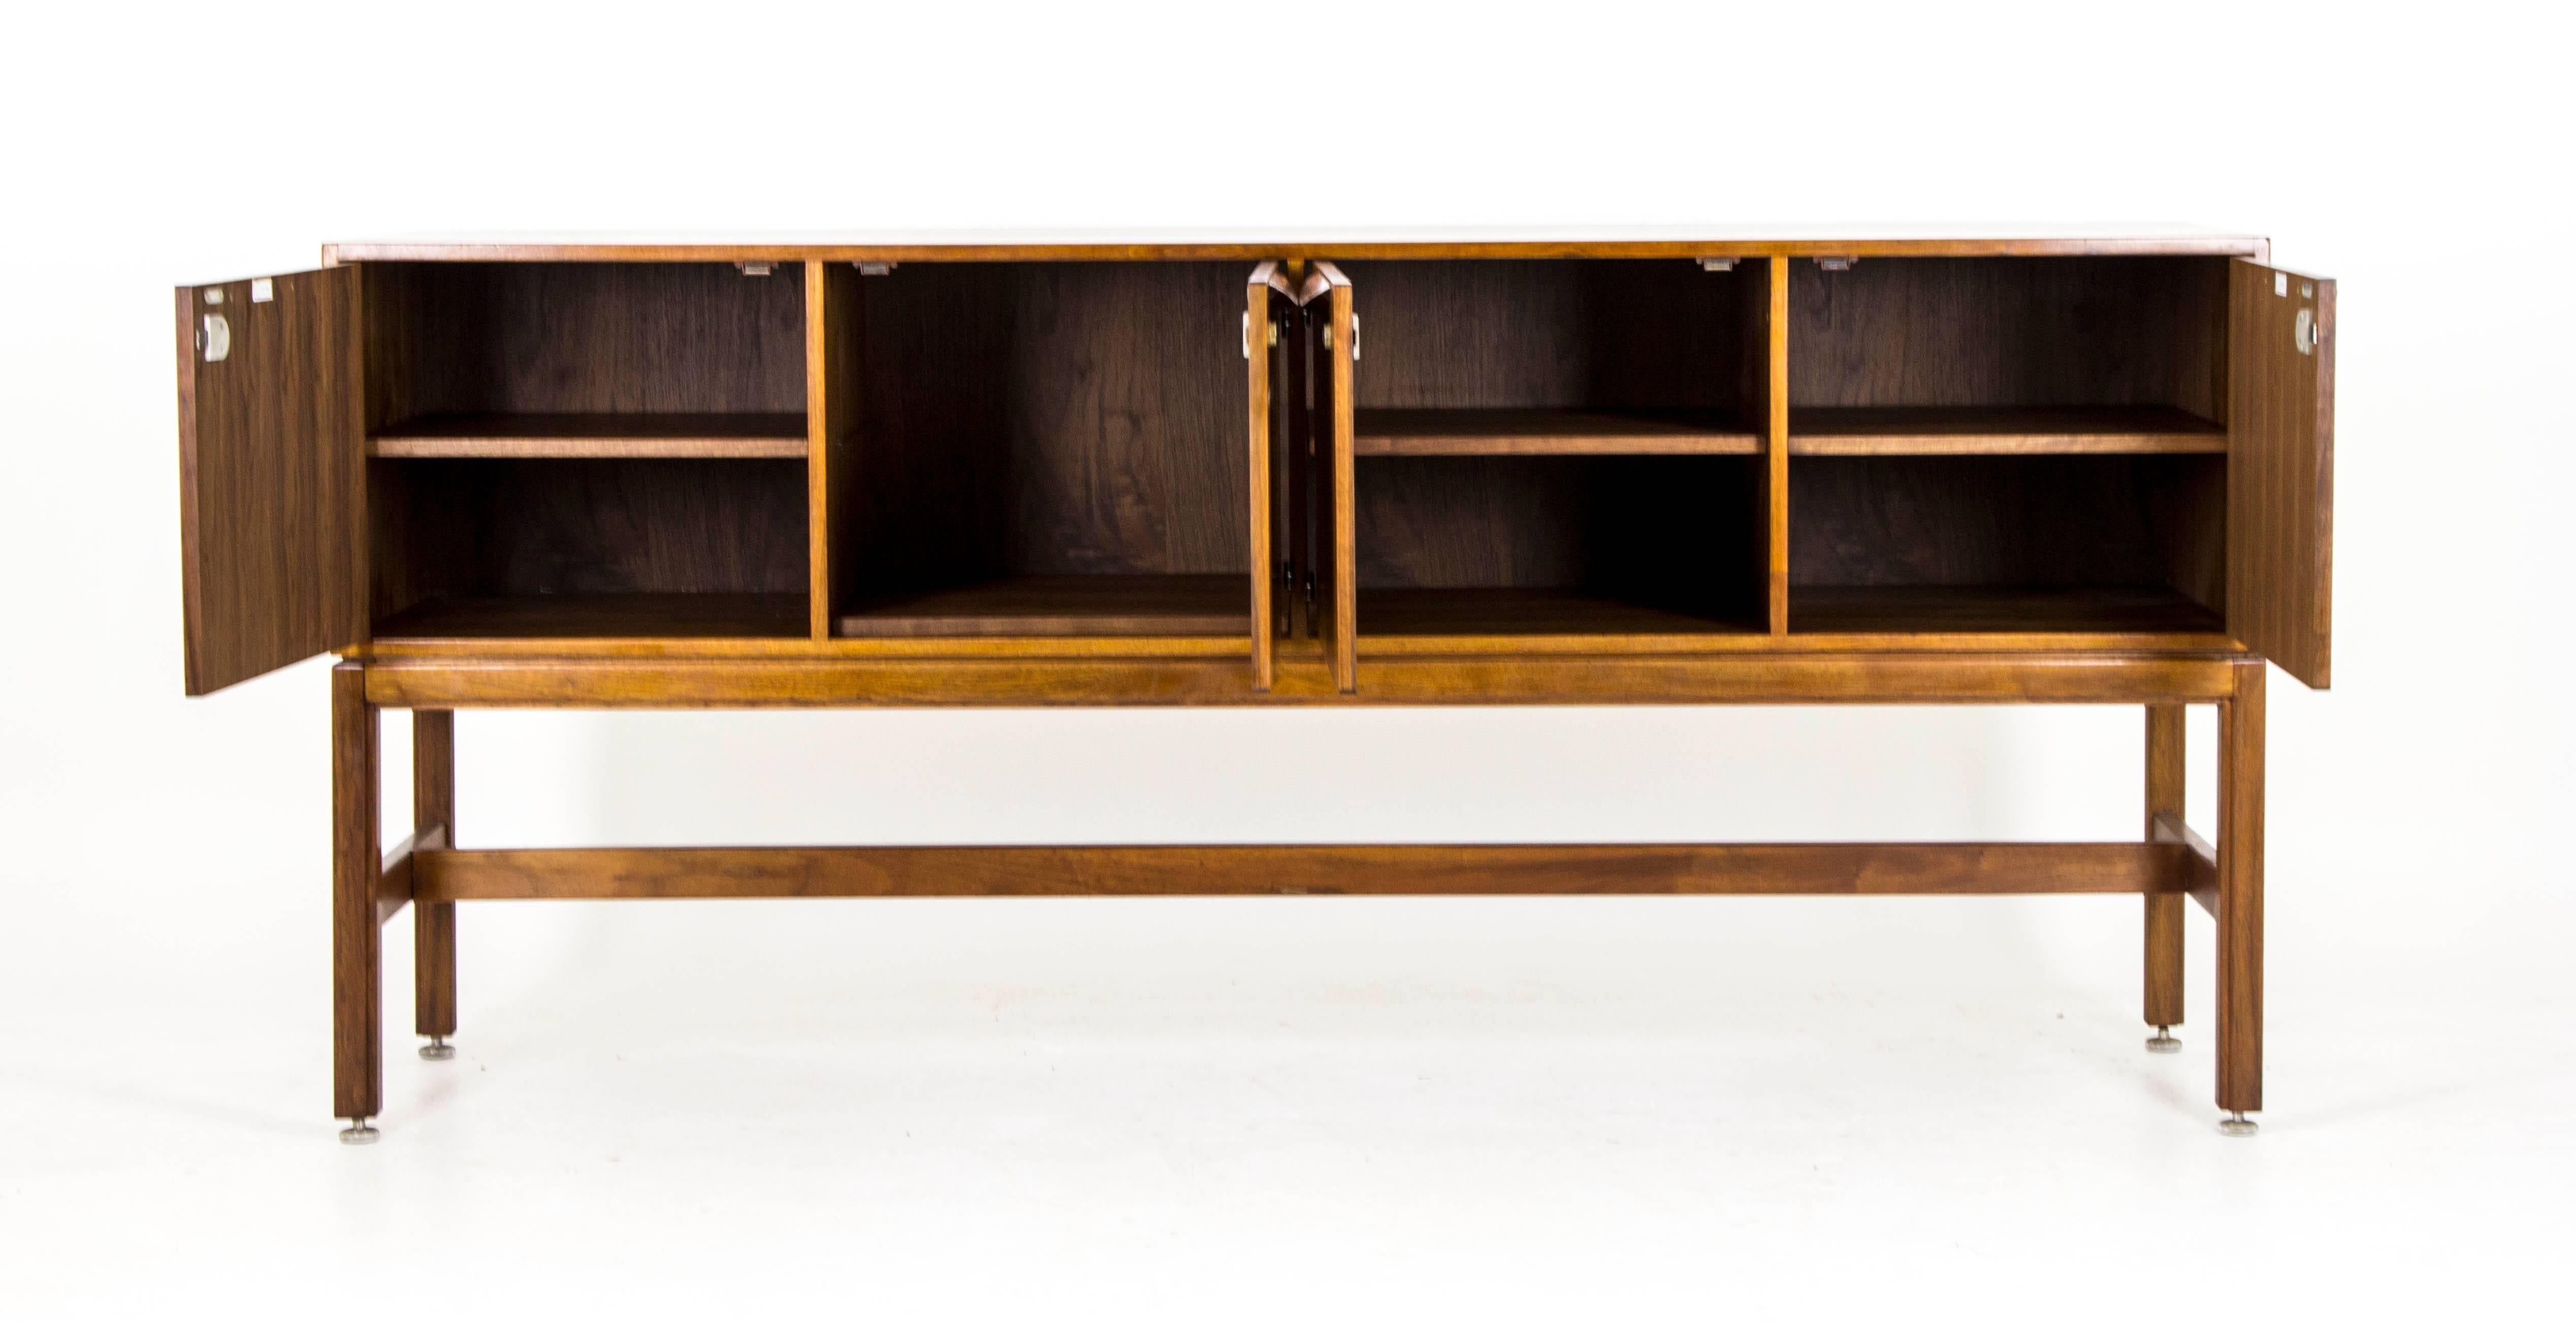 Denmark
1950
Rosewood sideboard designed by Jens Rison
Scalloped rosewood handles
Total of four cabinets with shelving, all lockable
Bullet shaped nickel-plated hinges
Finished back
Appears to be floating on base

$3950

B519A
Measures: